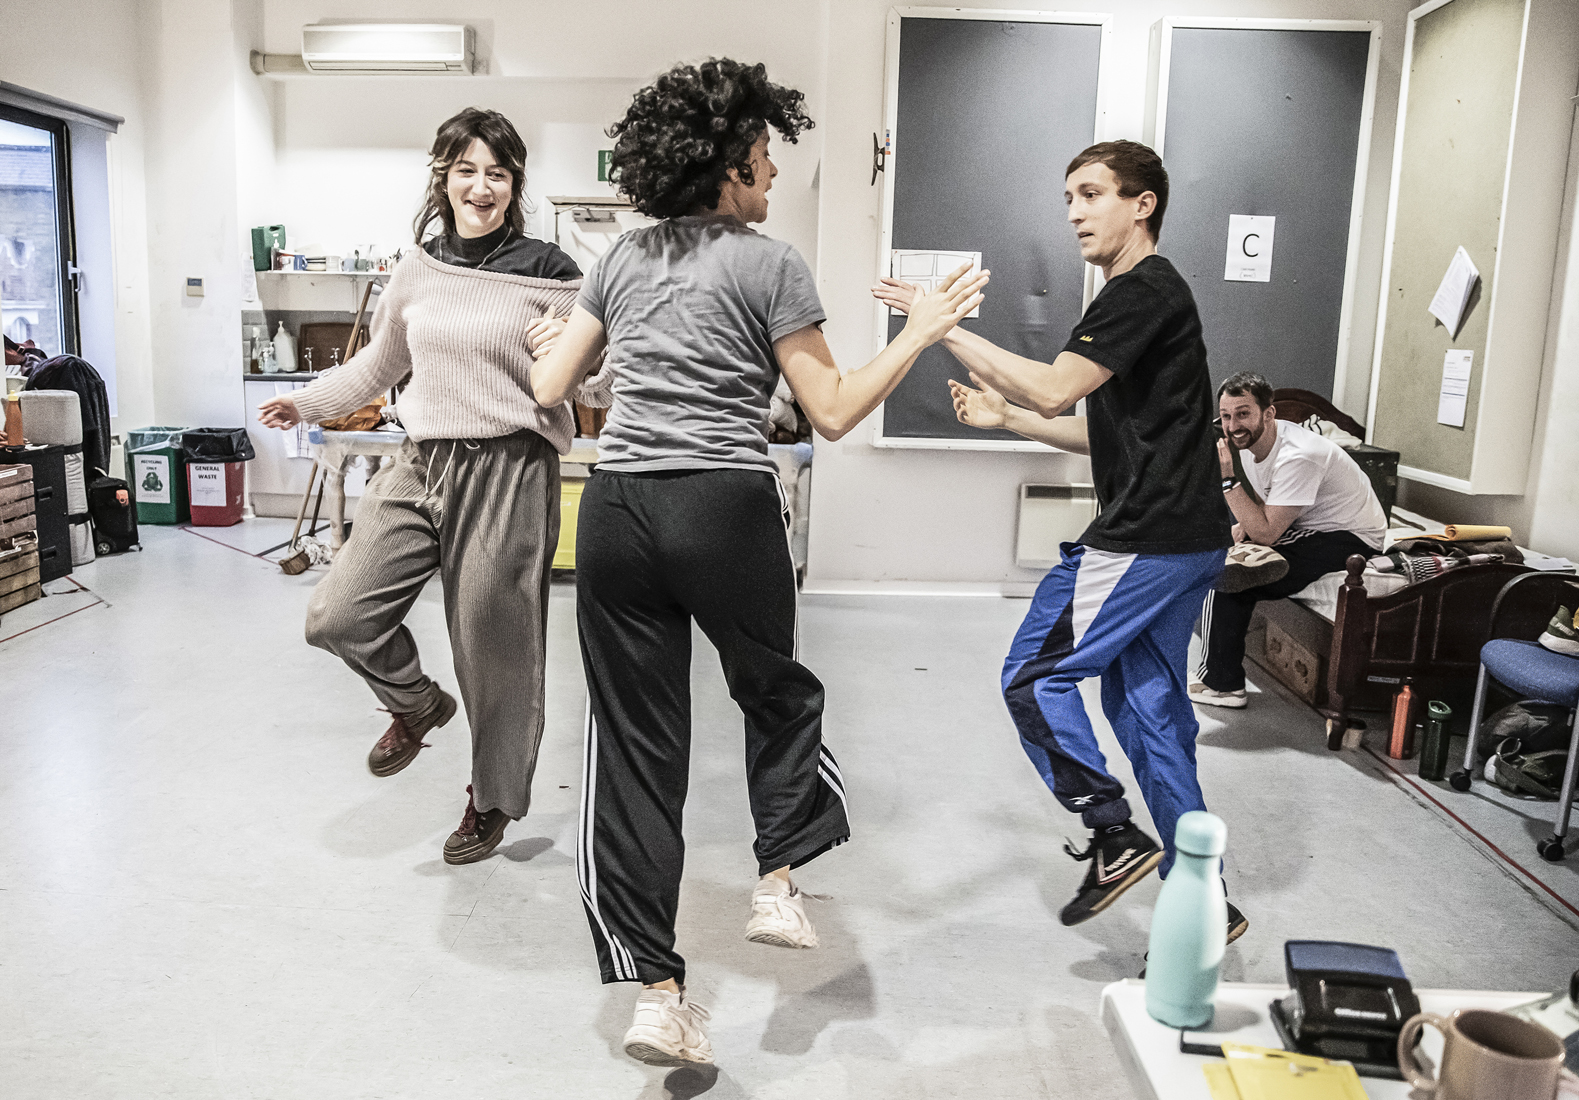 In the rehearsal room, Rebecca Banatvala, AK Golding, and Sam Newton join hands and dance in a circle together.